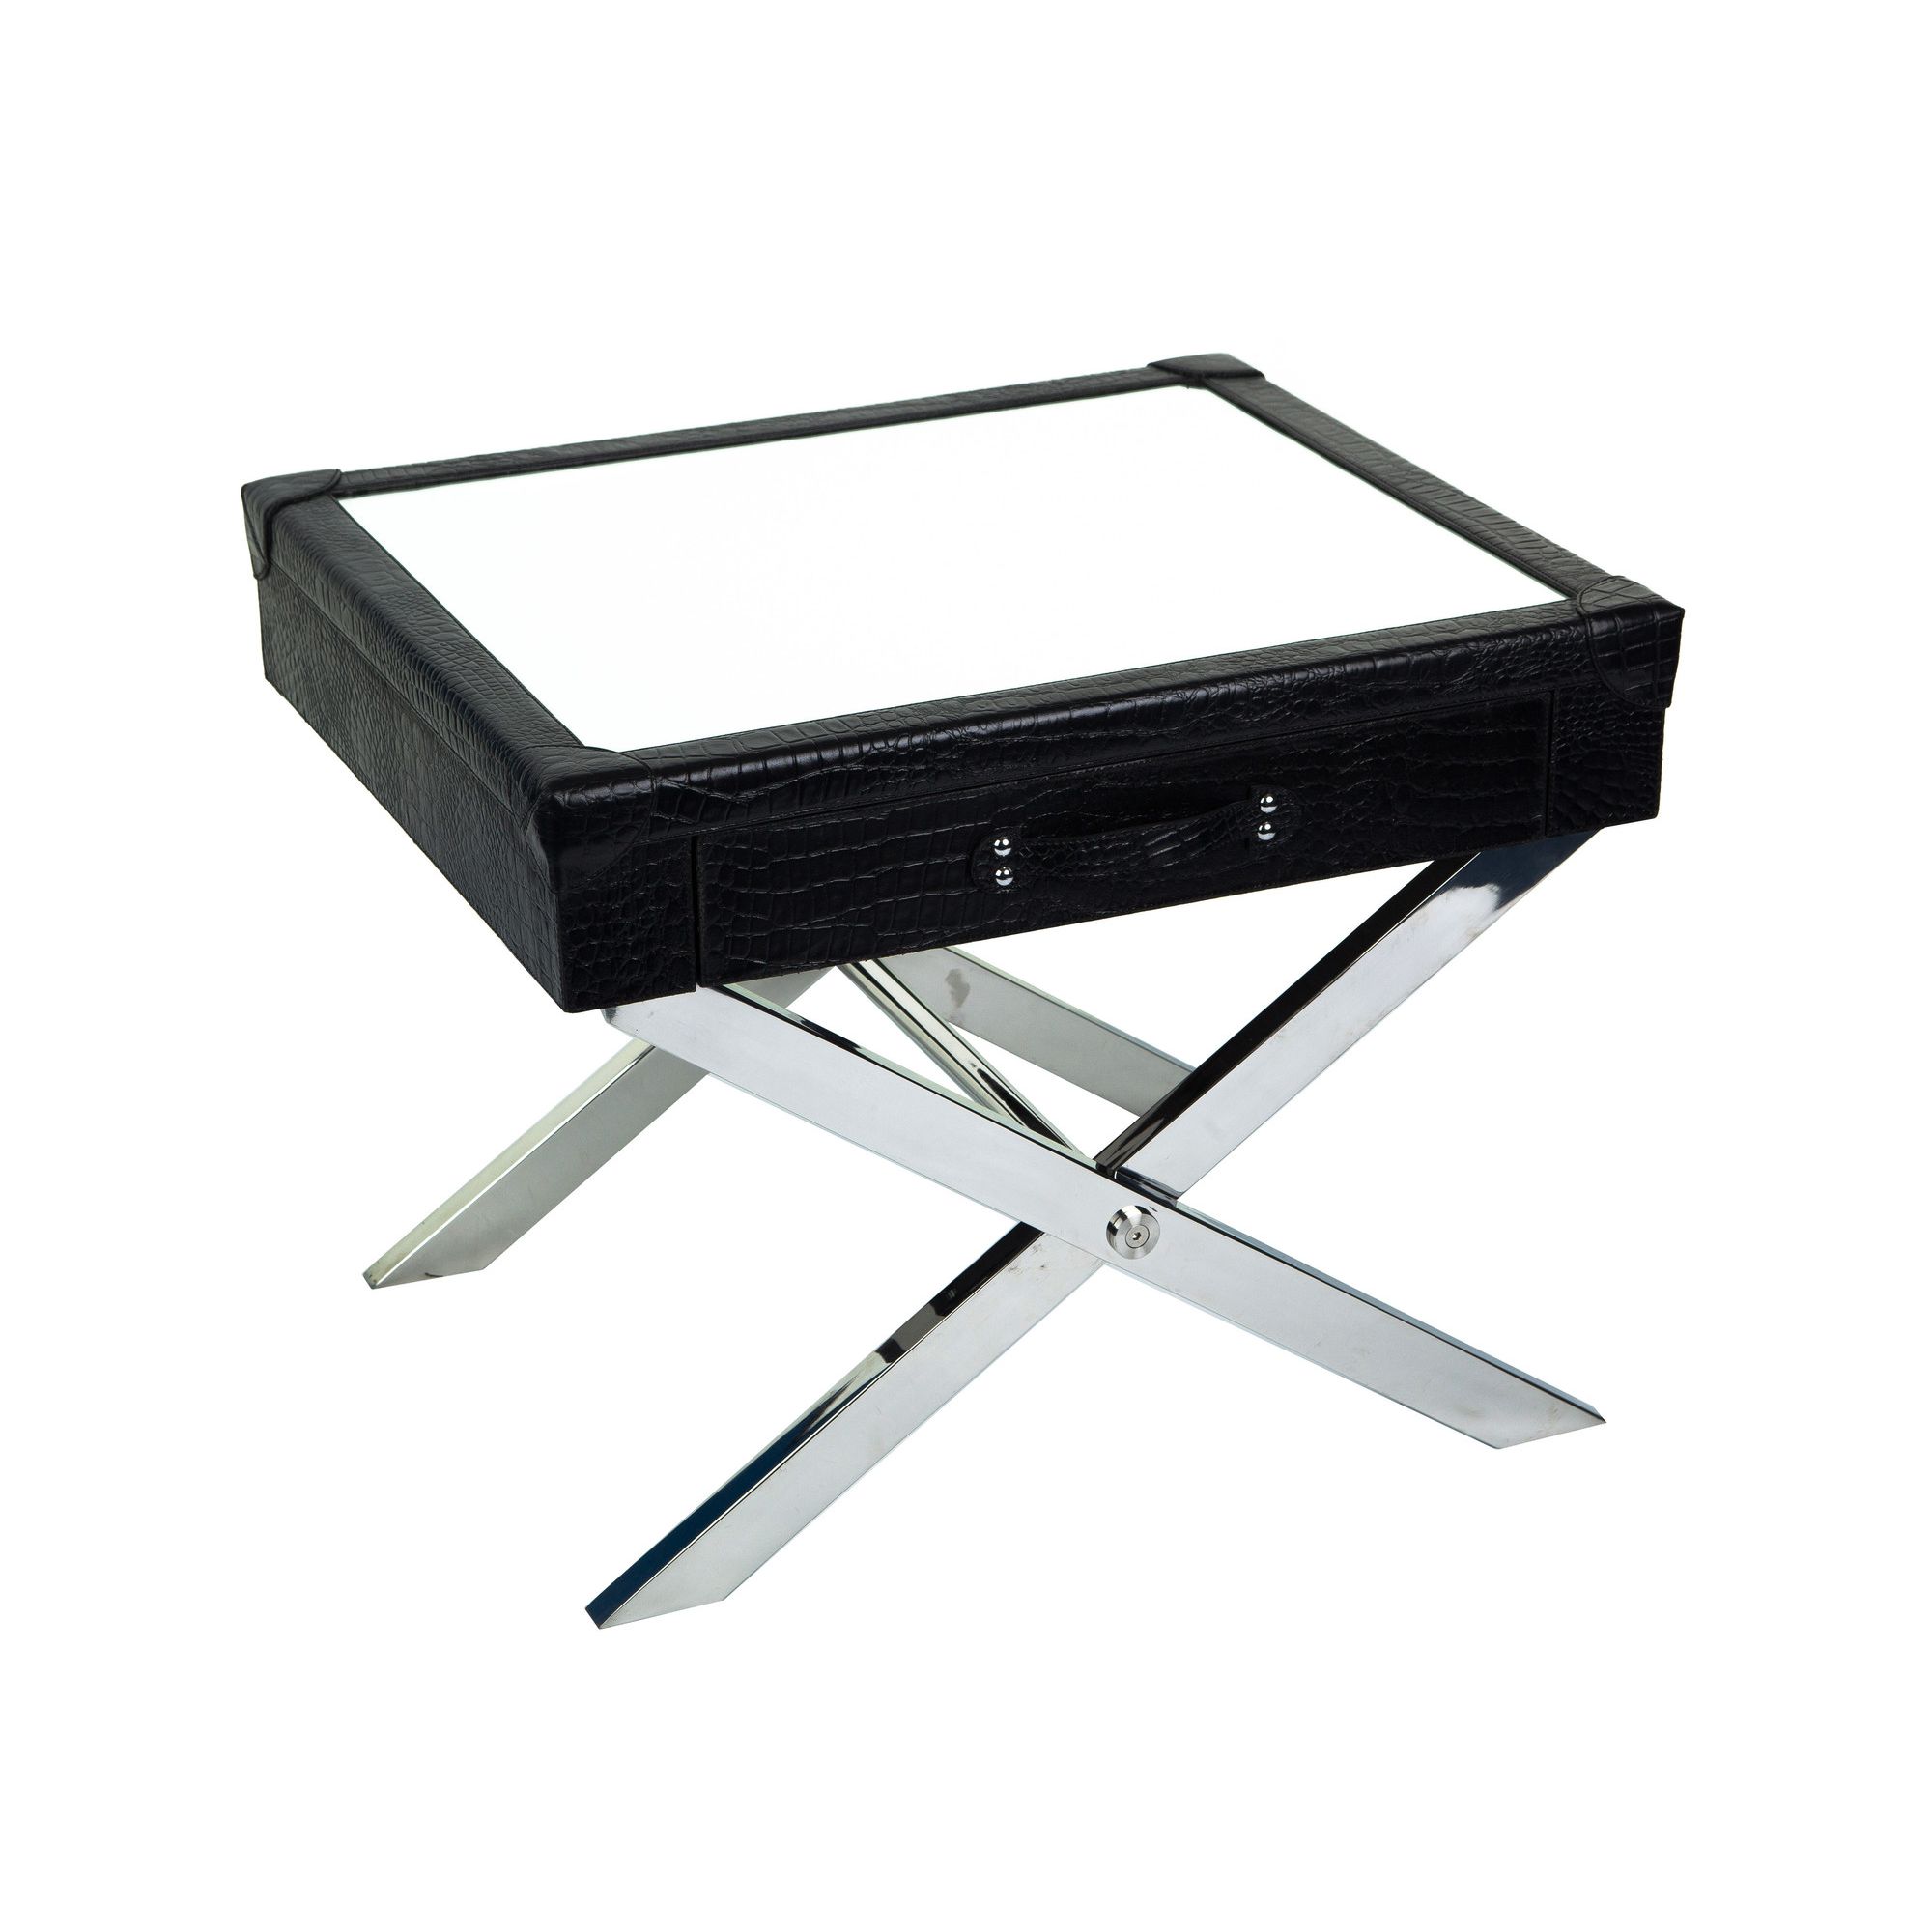 Jadeed Interiors Mirrored Leather Side Table - Black at Tescos Direct